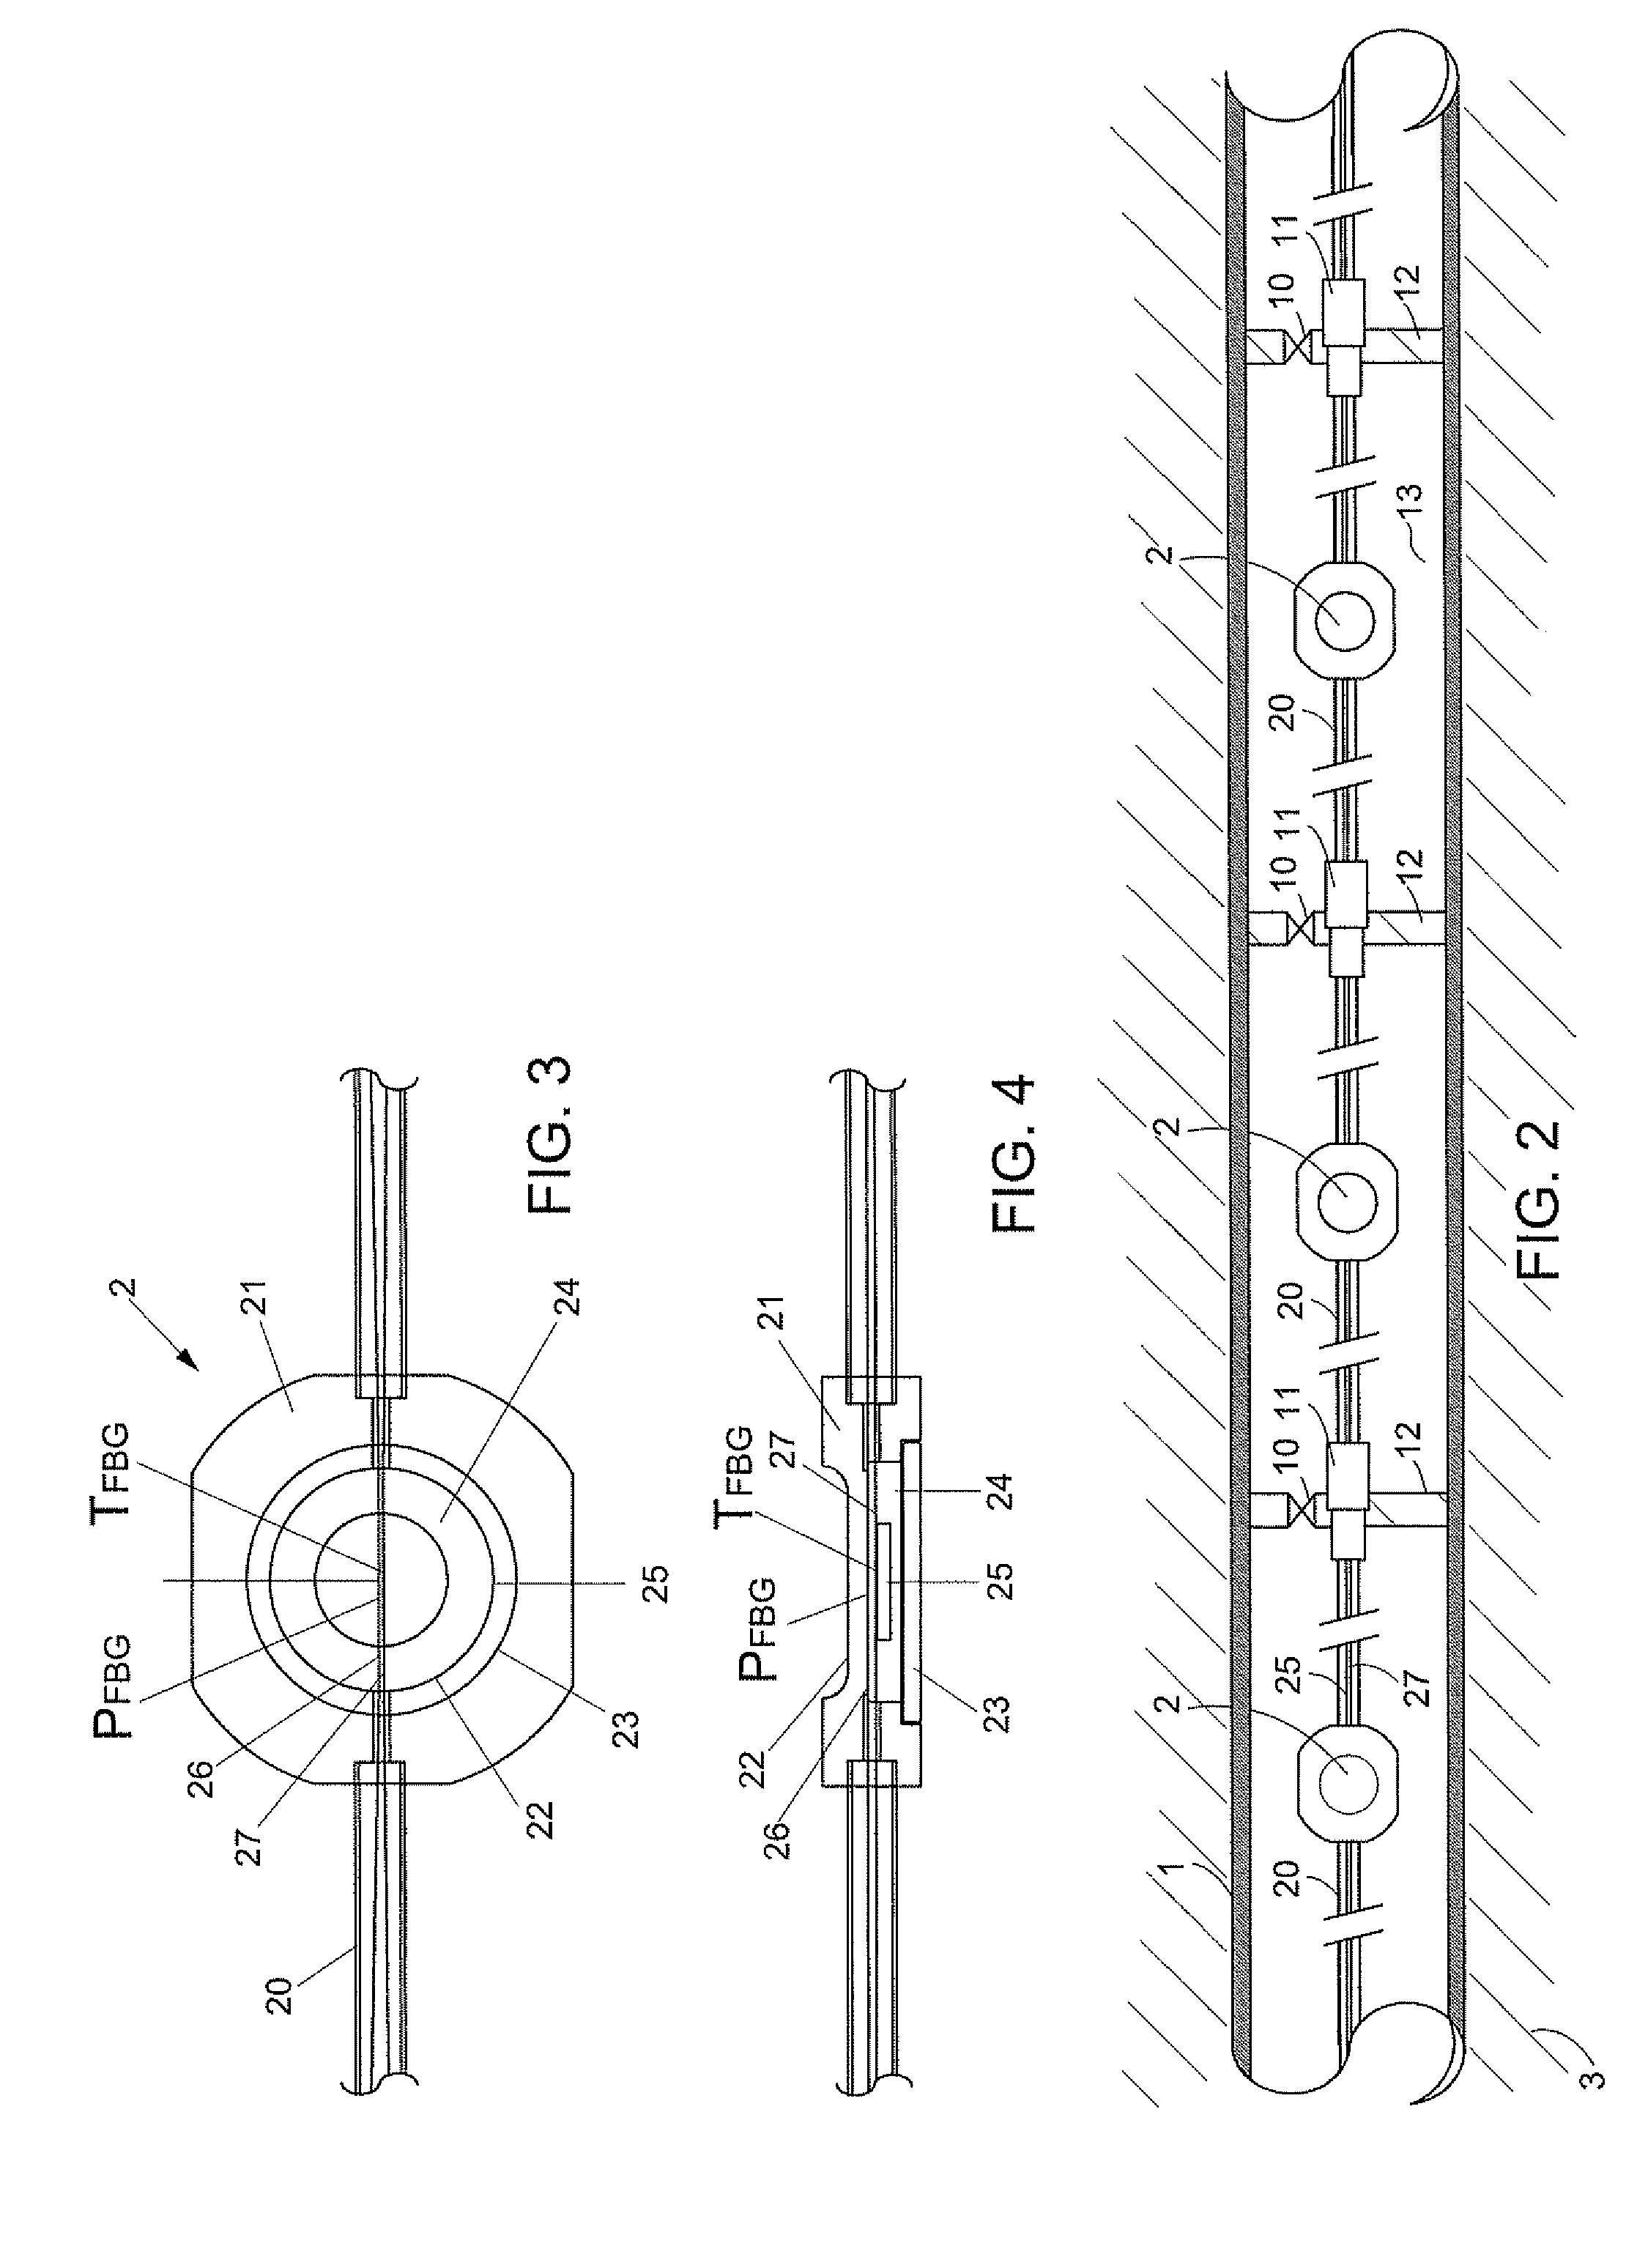 Method and system for monitoring waterbottom subsidence